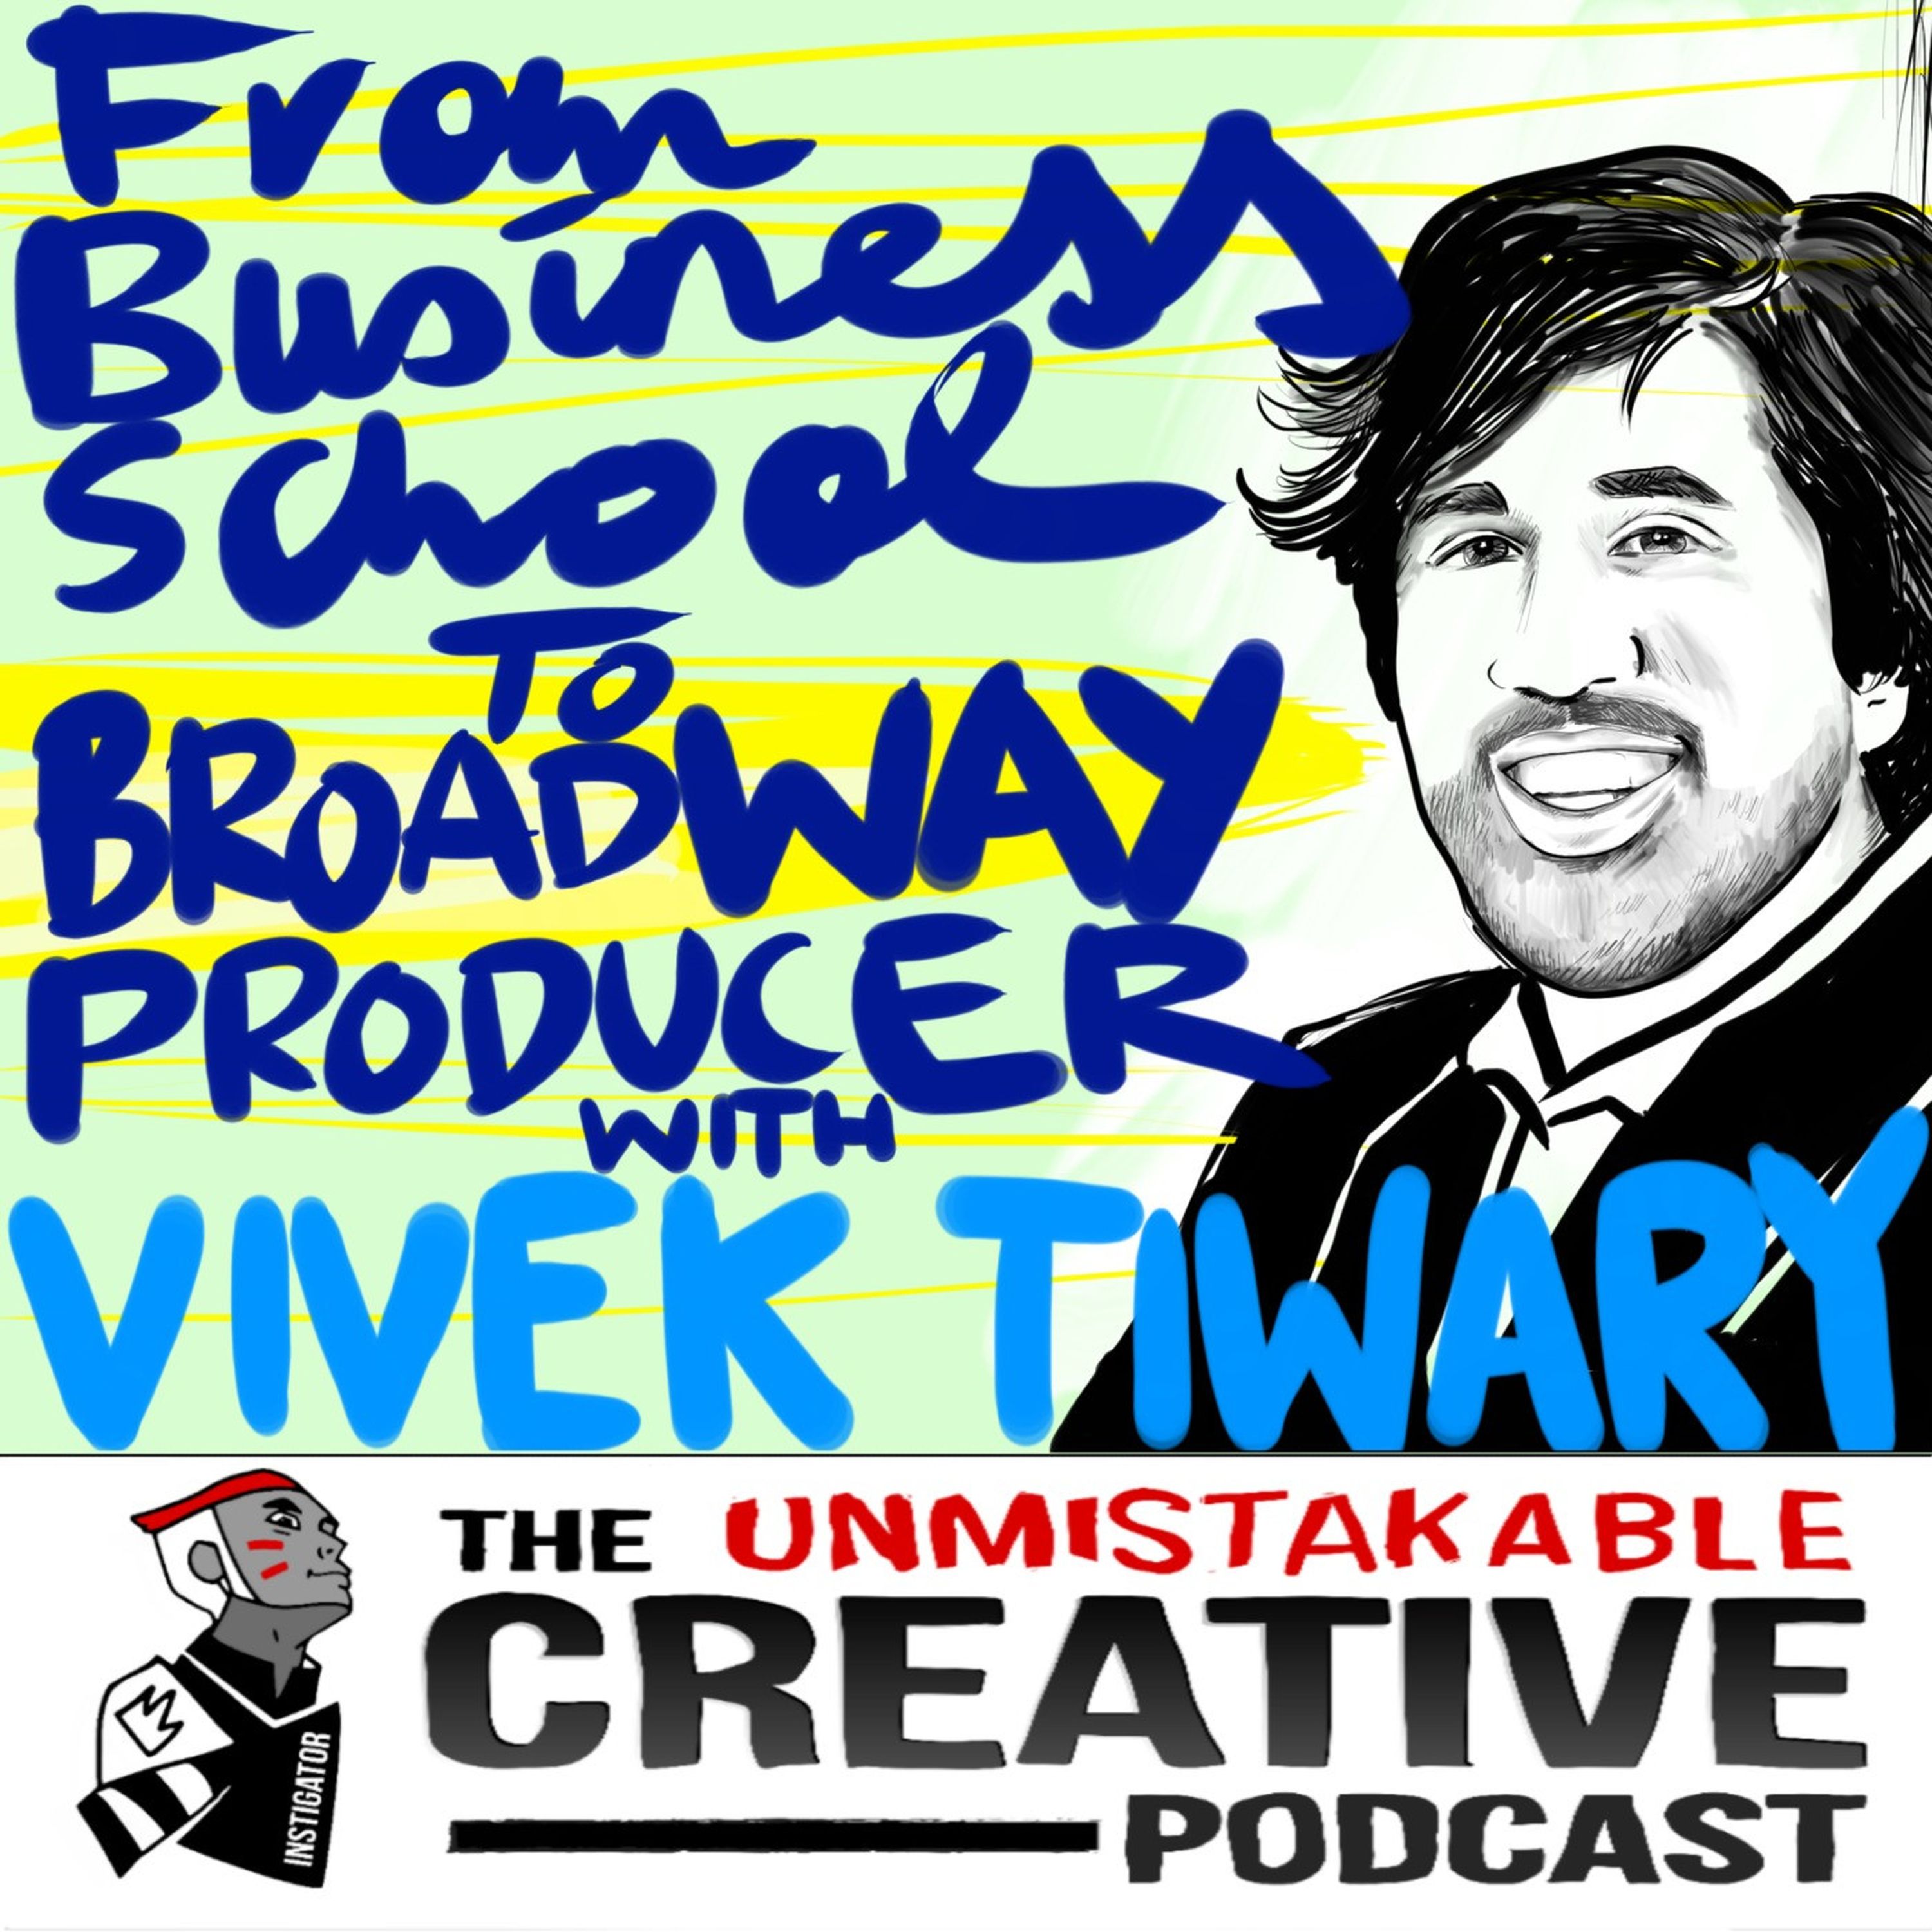 From Business School to Broadway Producer with Vivek Tiwary